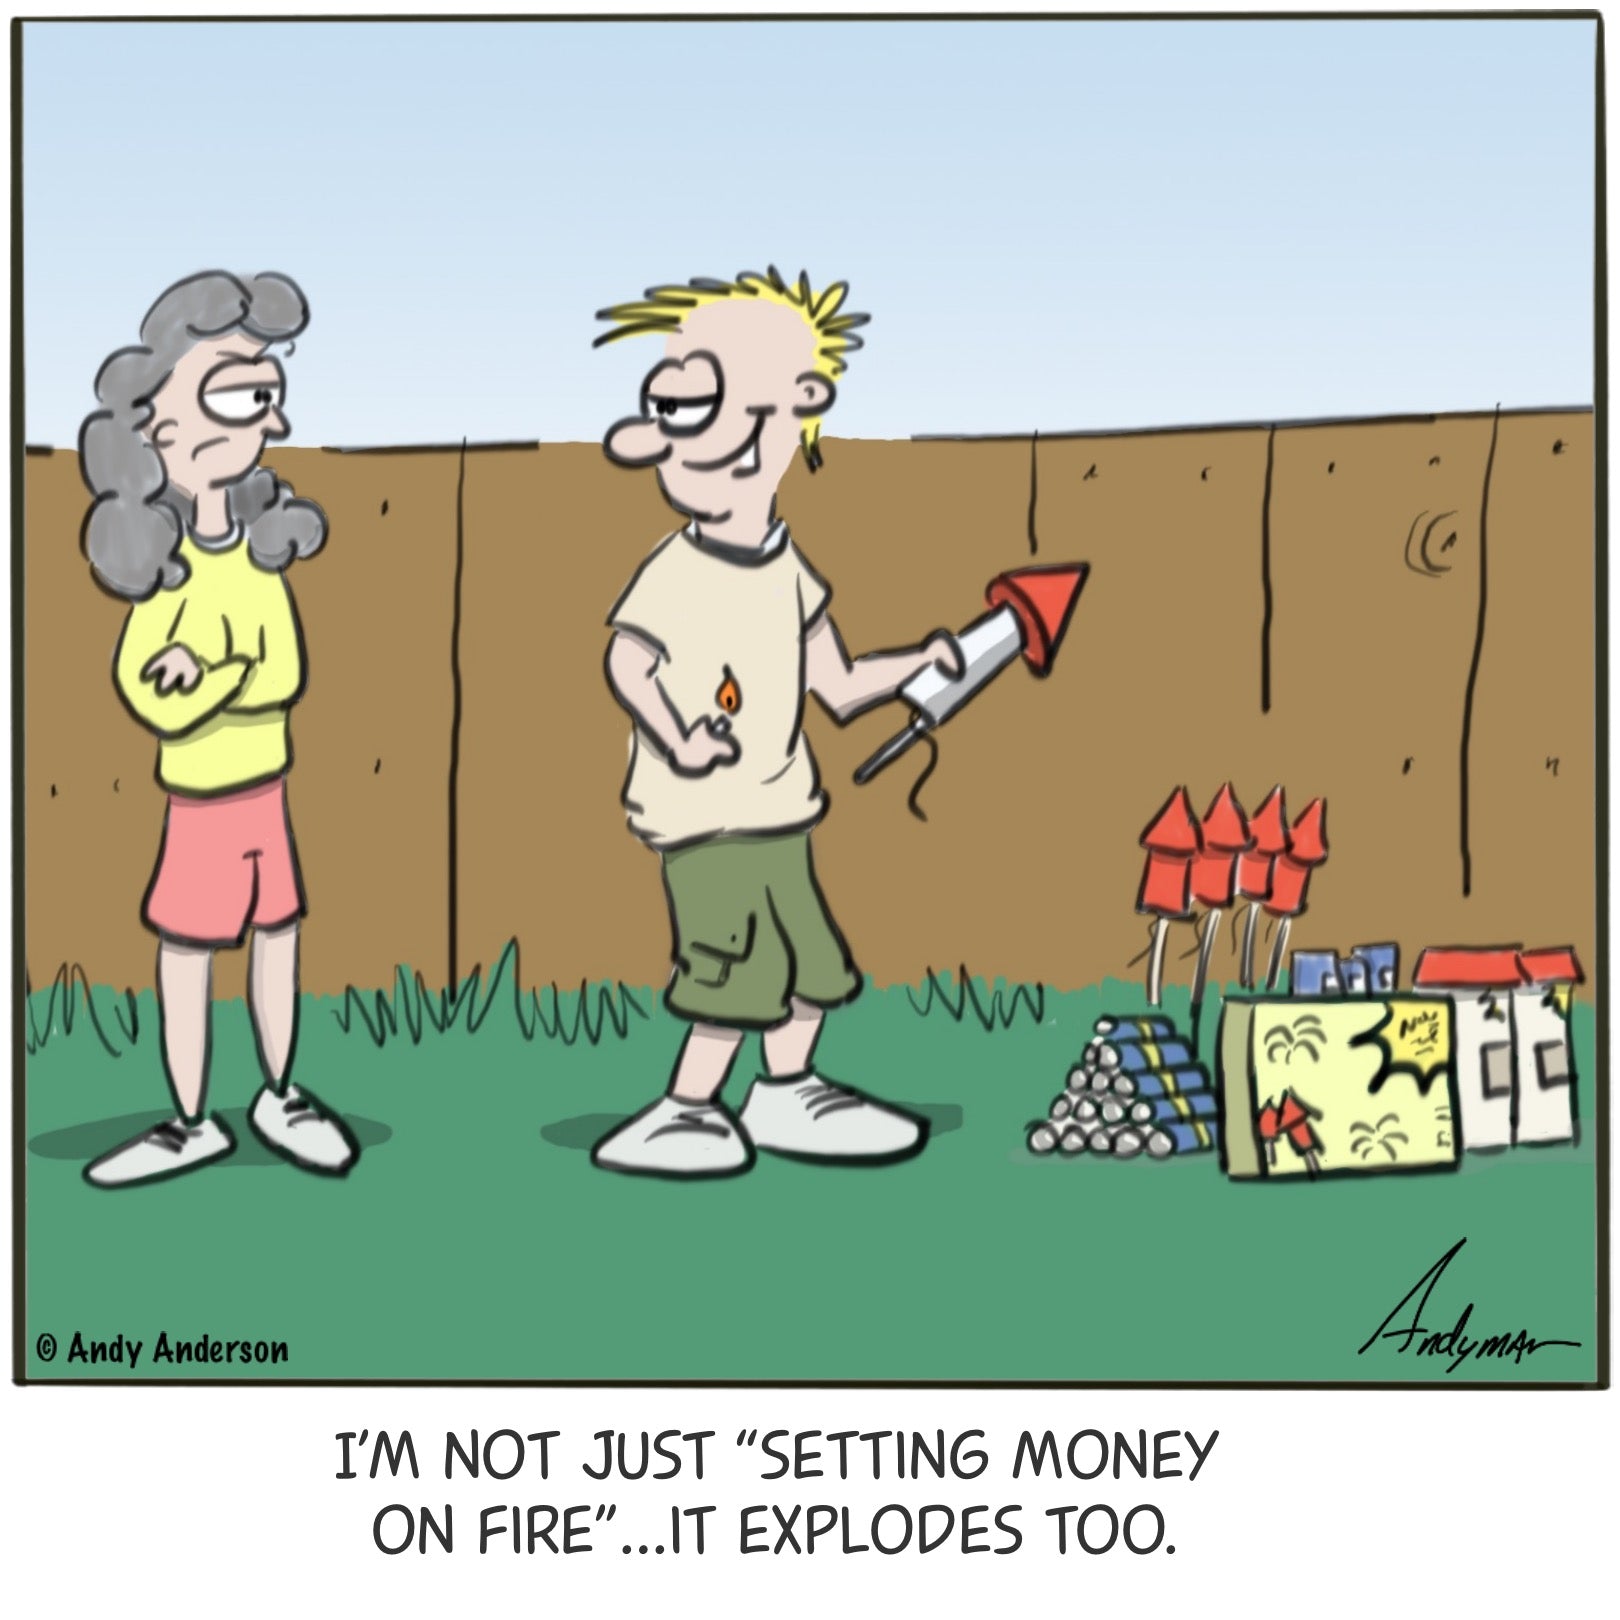 Cartoon about how fireworks are like setting your money on fire by Andy Anderson